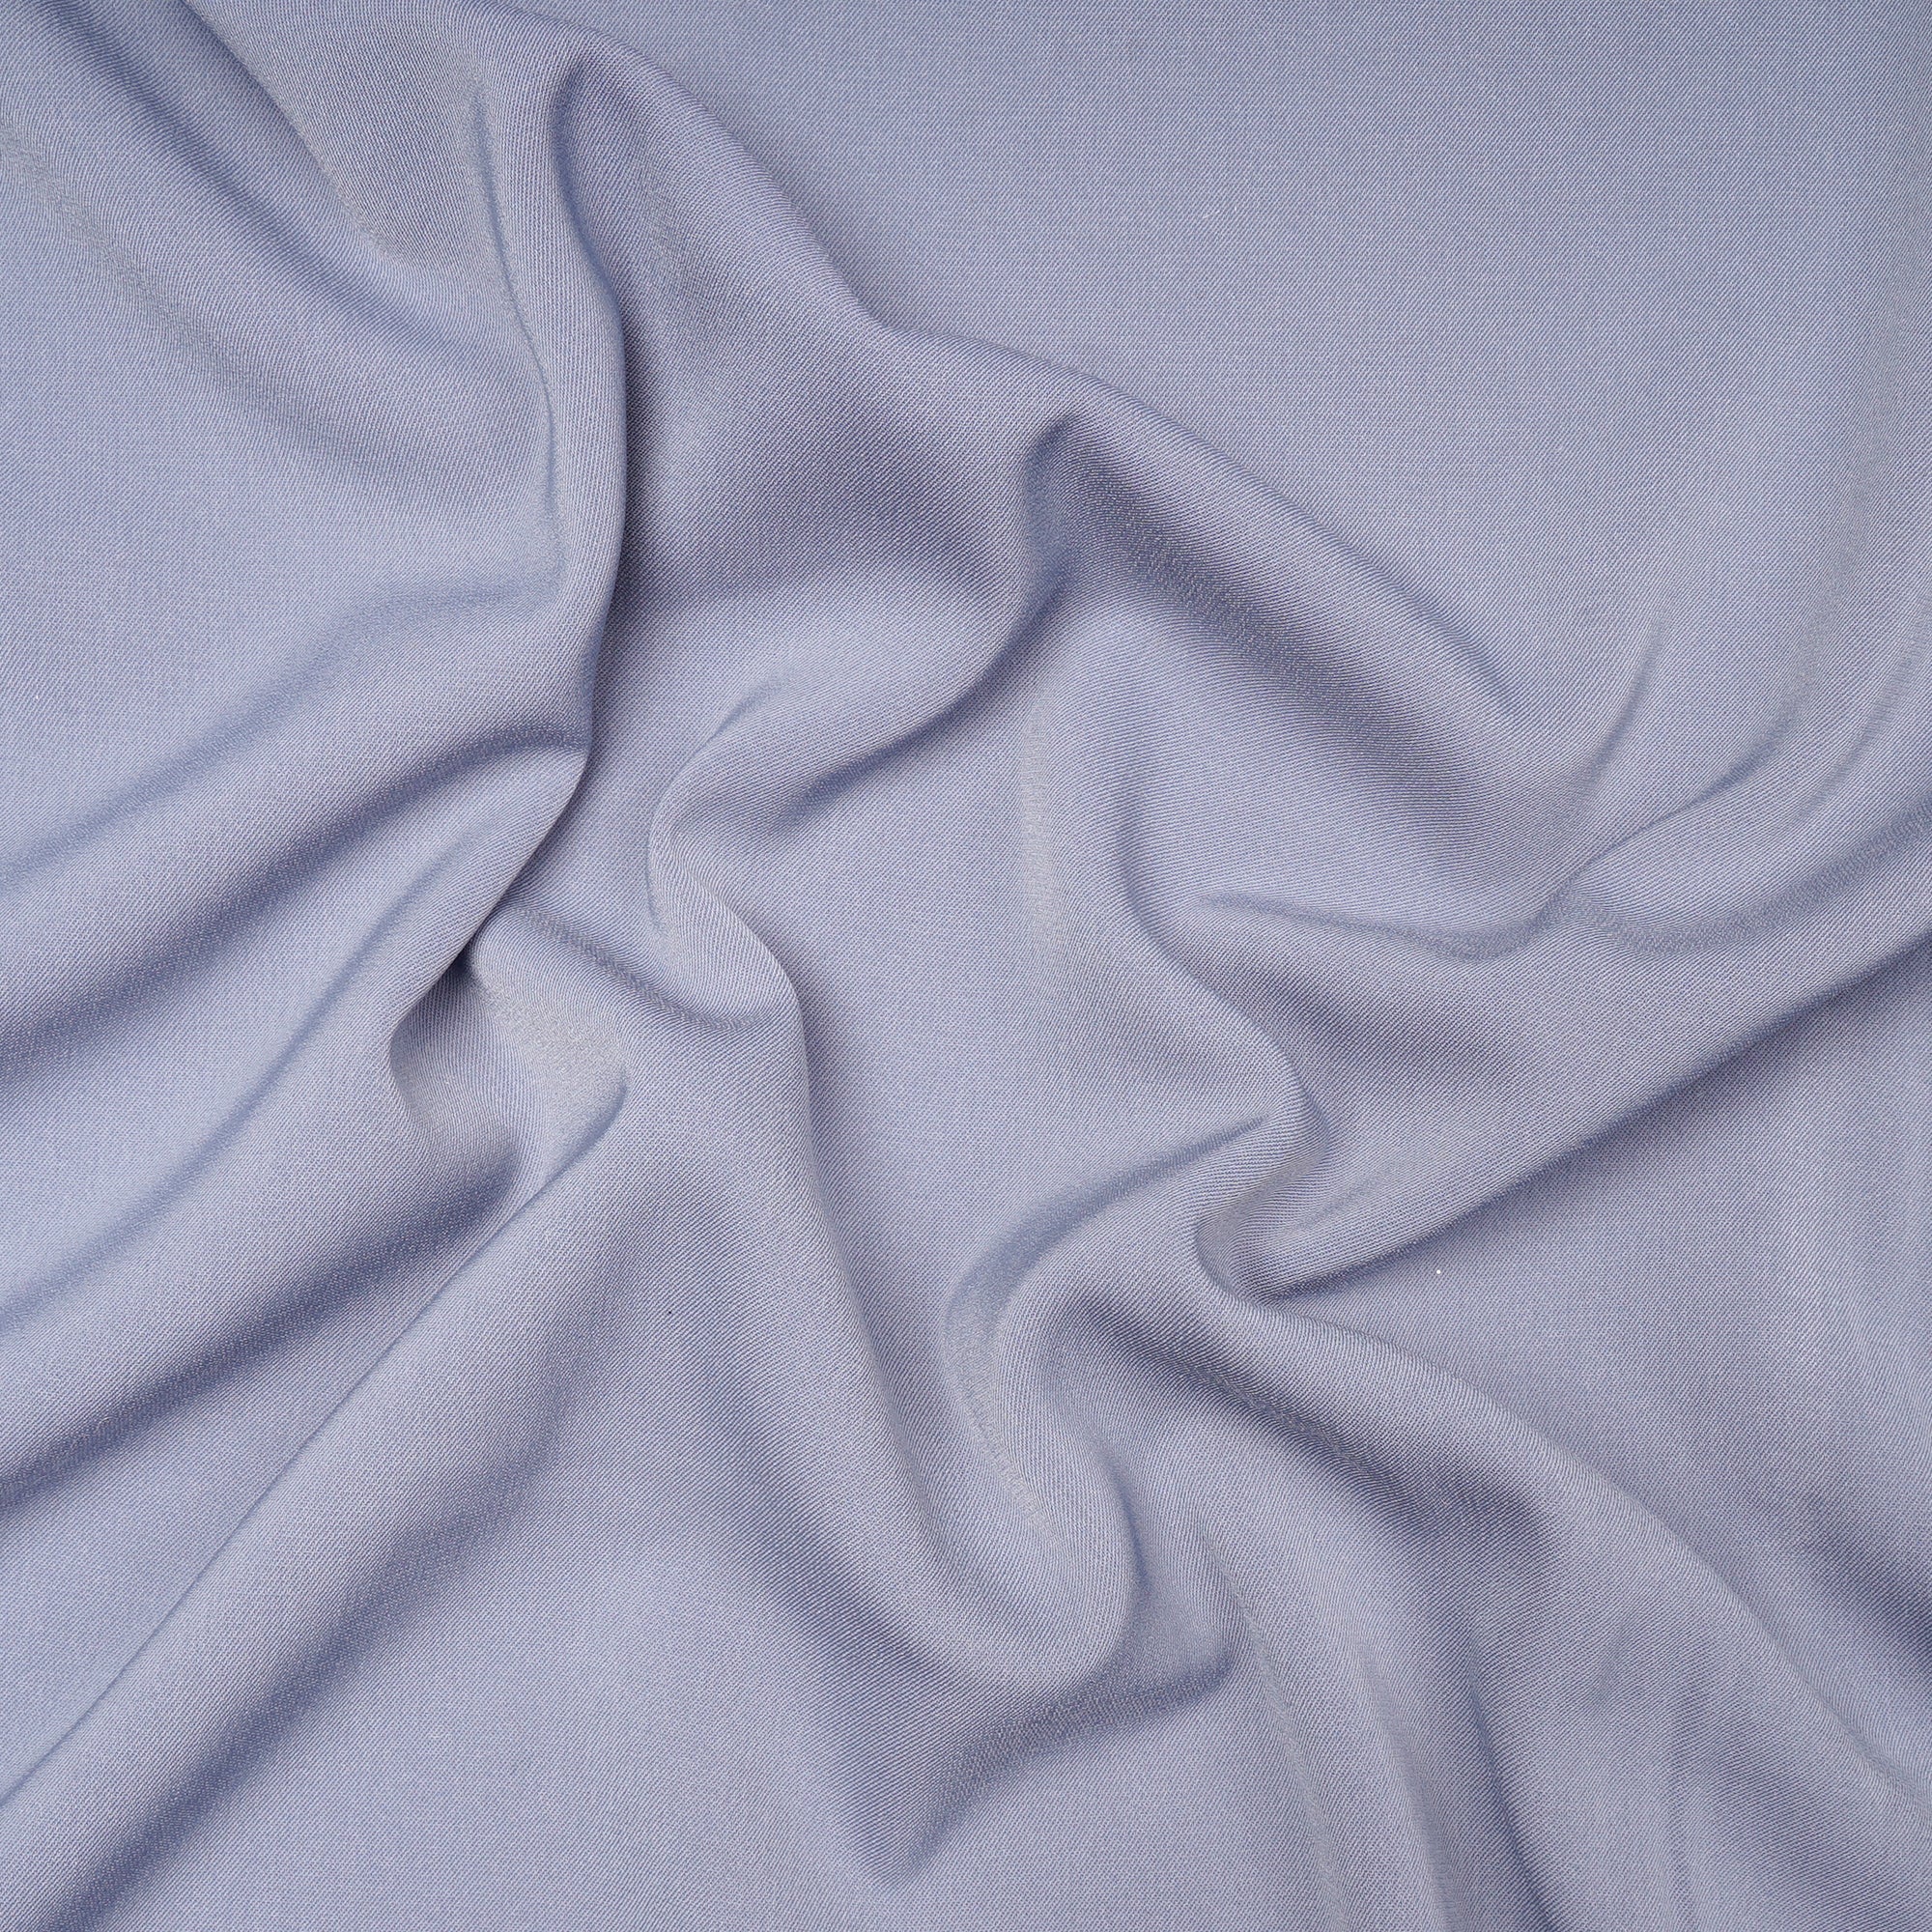 Grey Solid Dyed Imported Prada Crepe Fabric (60" Width)